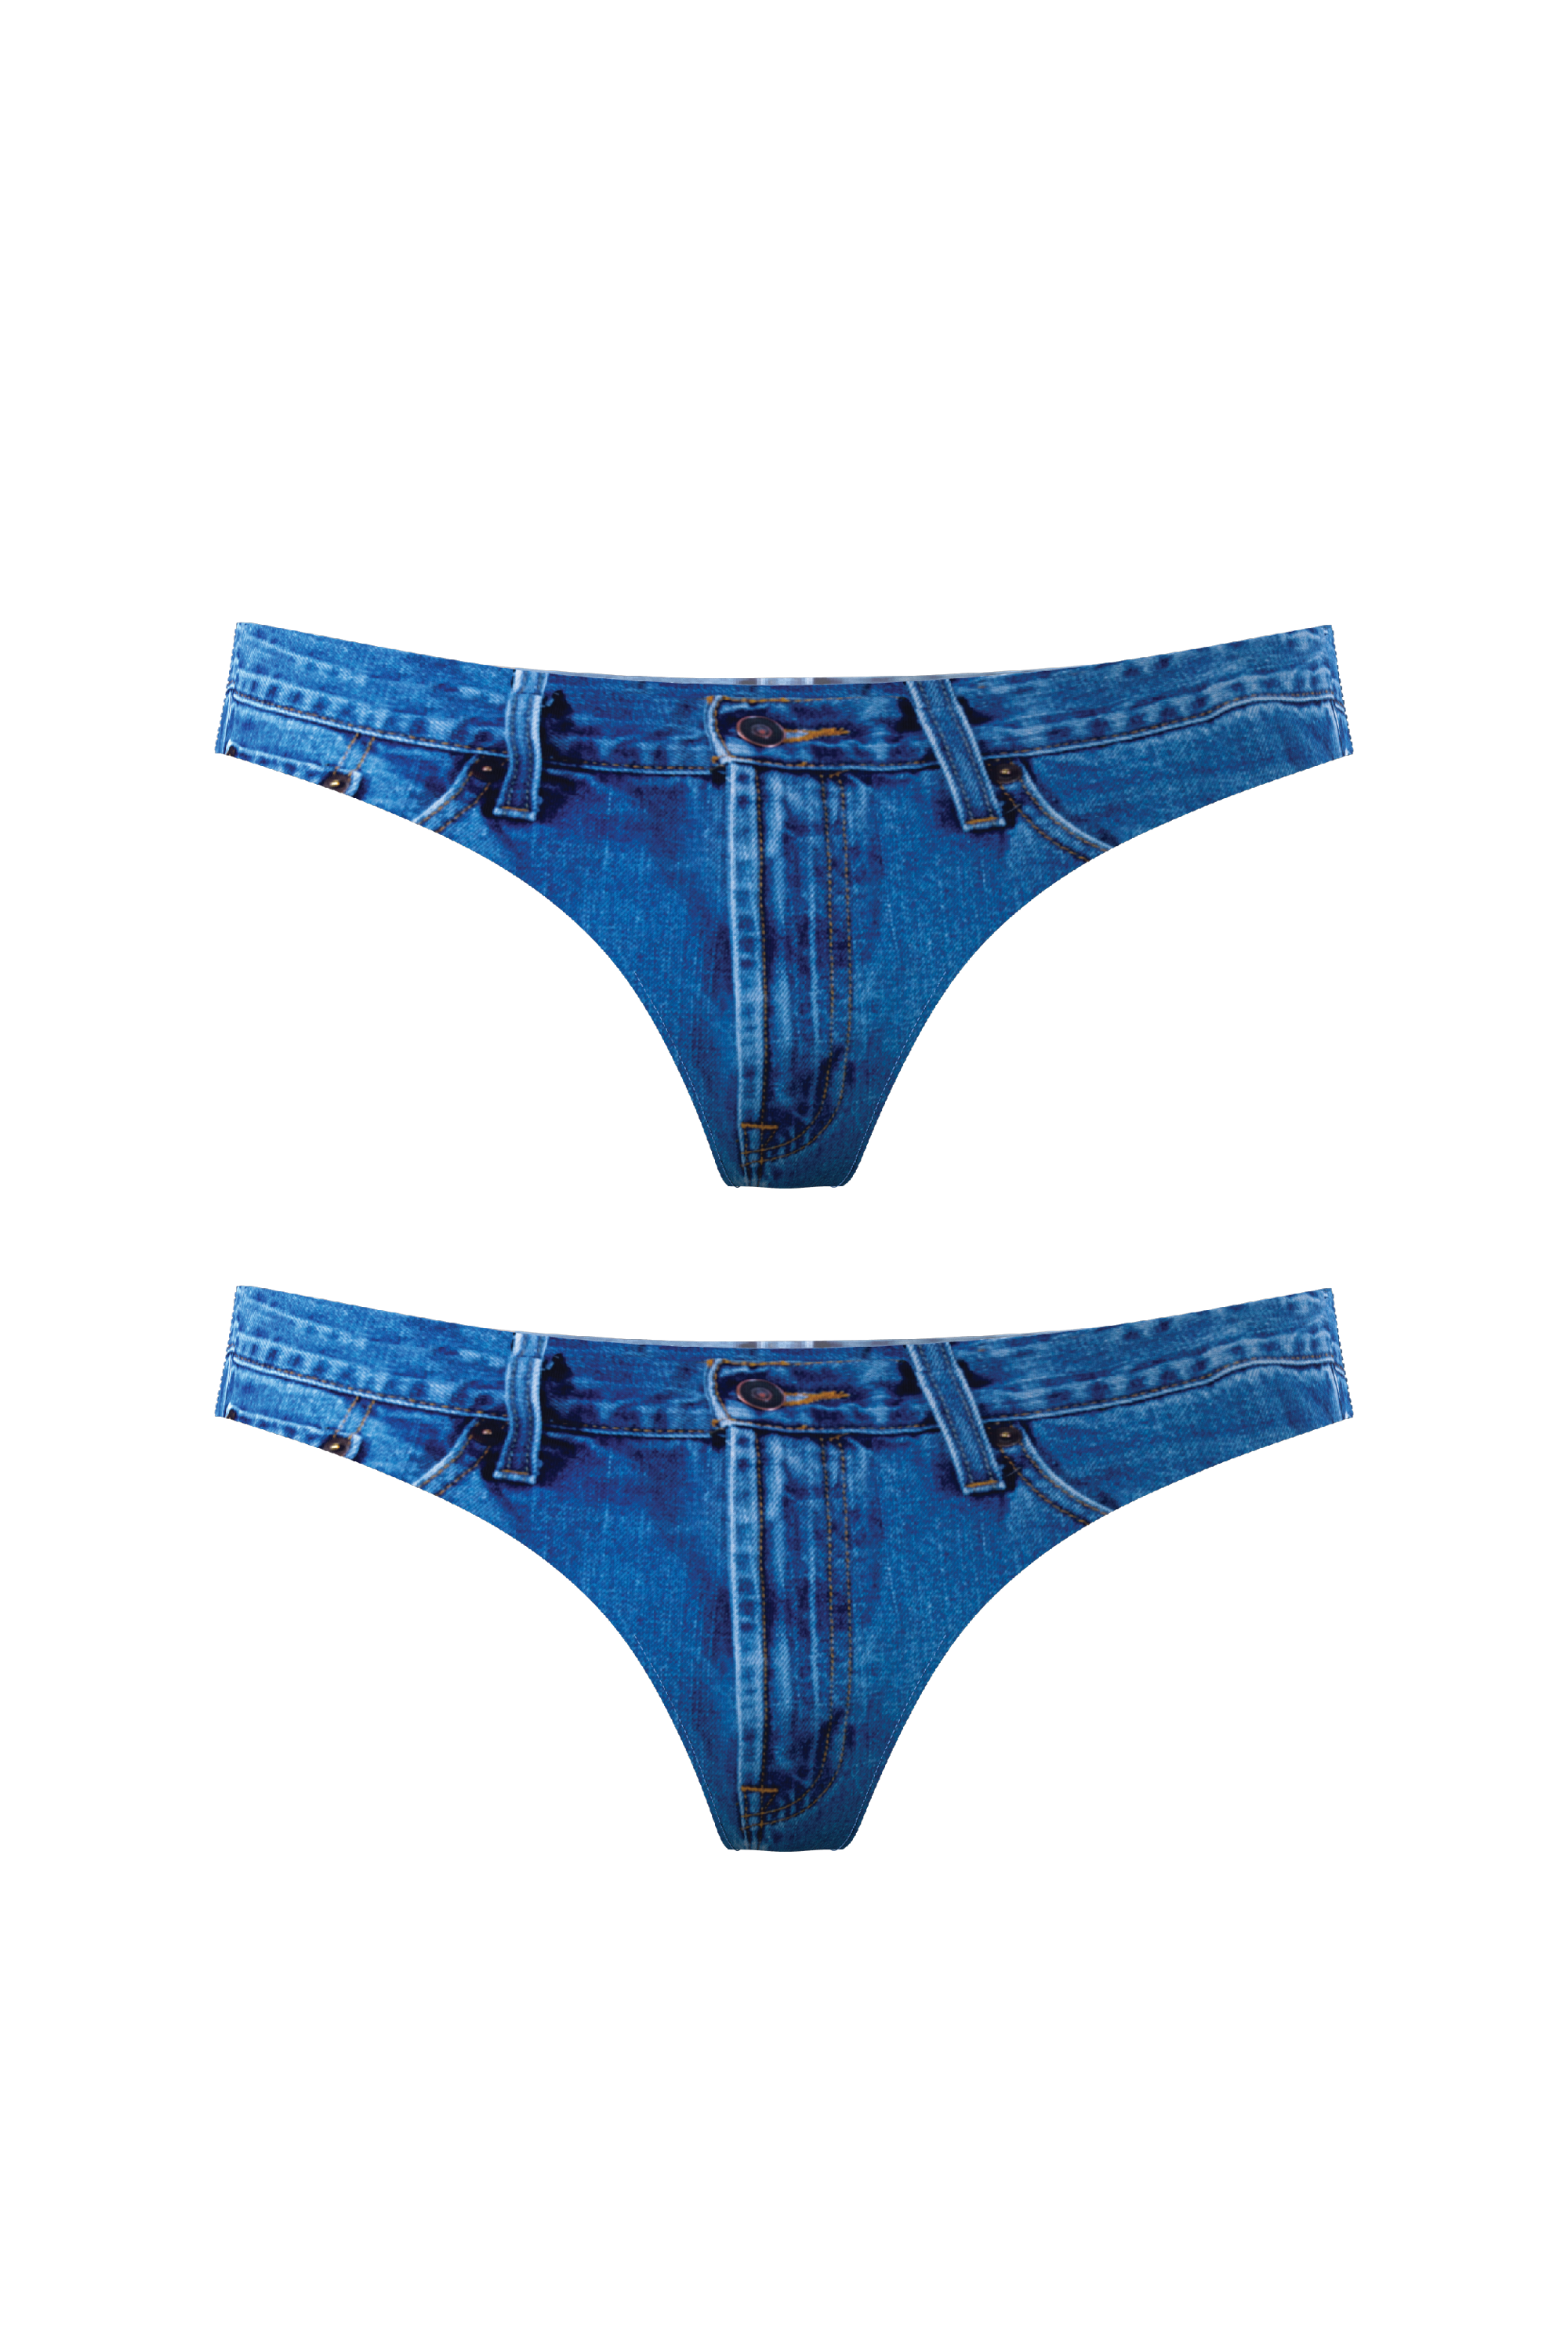 Linus Tech Tips on X: Success! 30k likes for a His & Hers matching  underwear photo 🤣🤣  / X